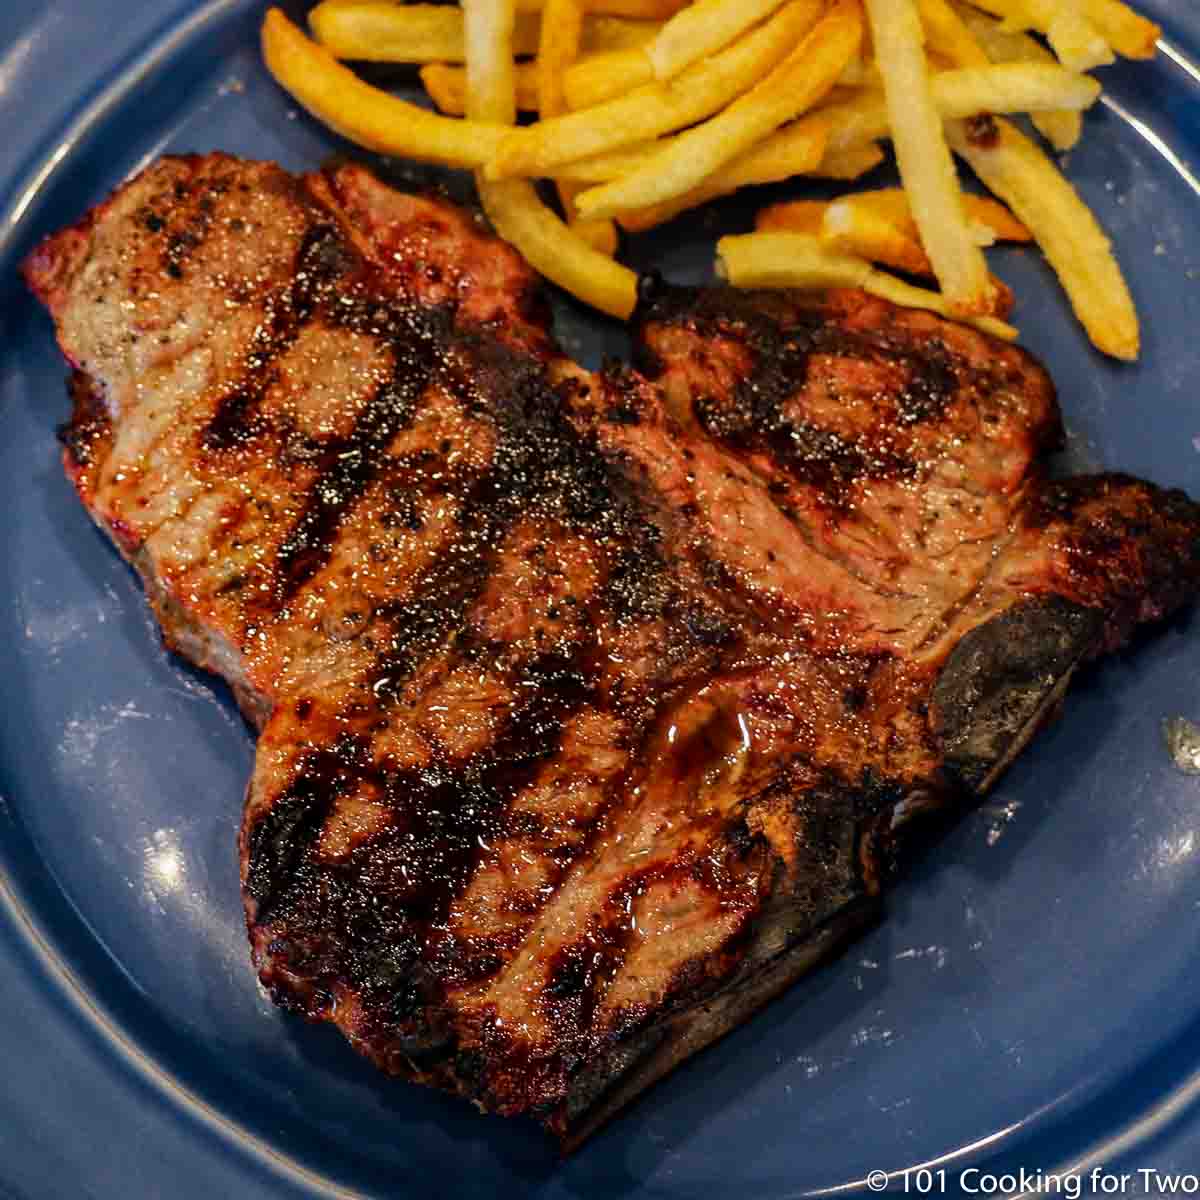 Picture of a nicely done porterhouse steak on a blue plate with French fries